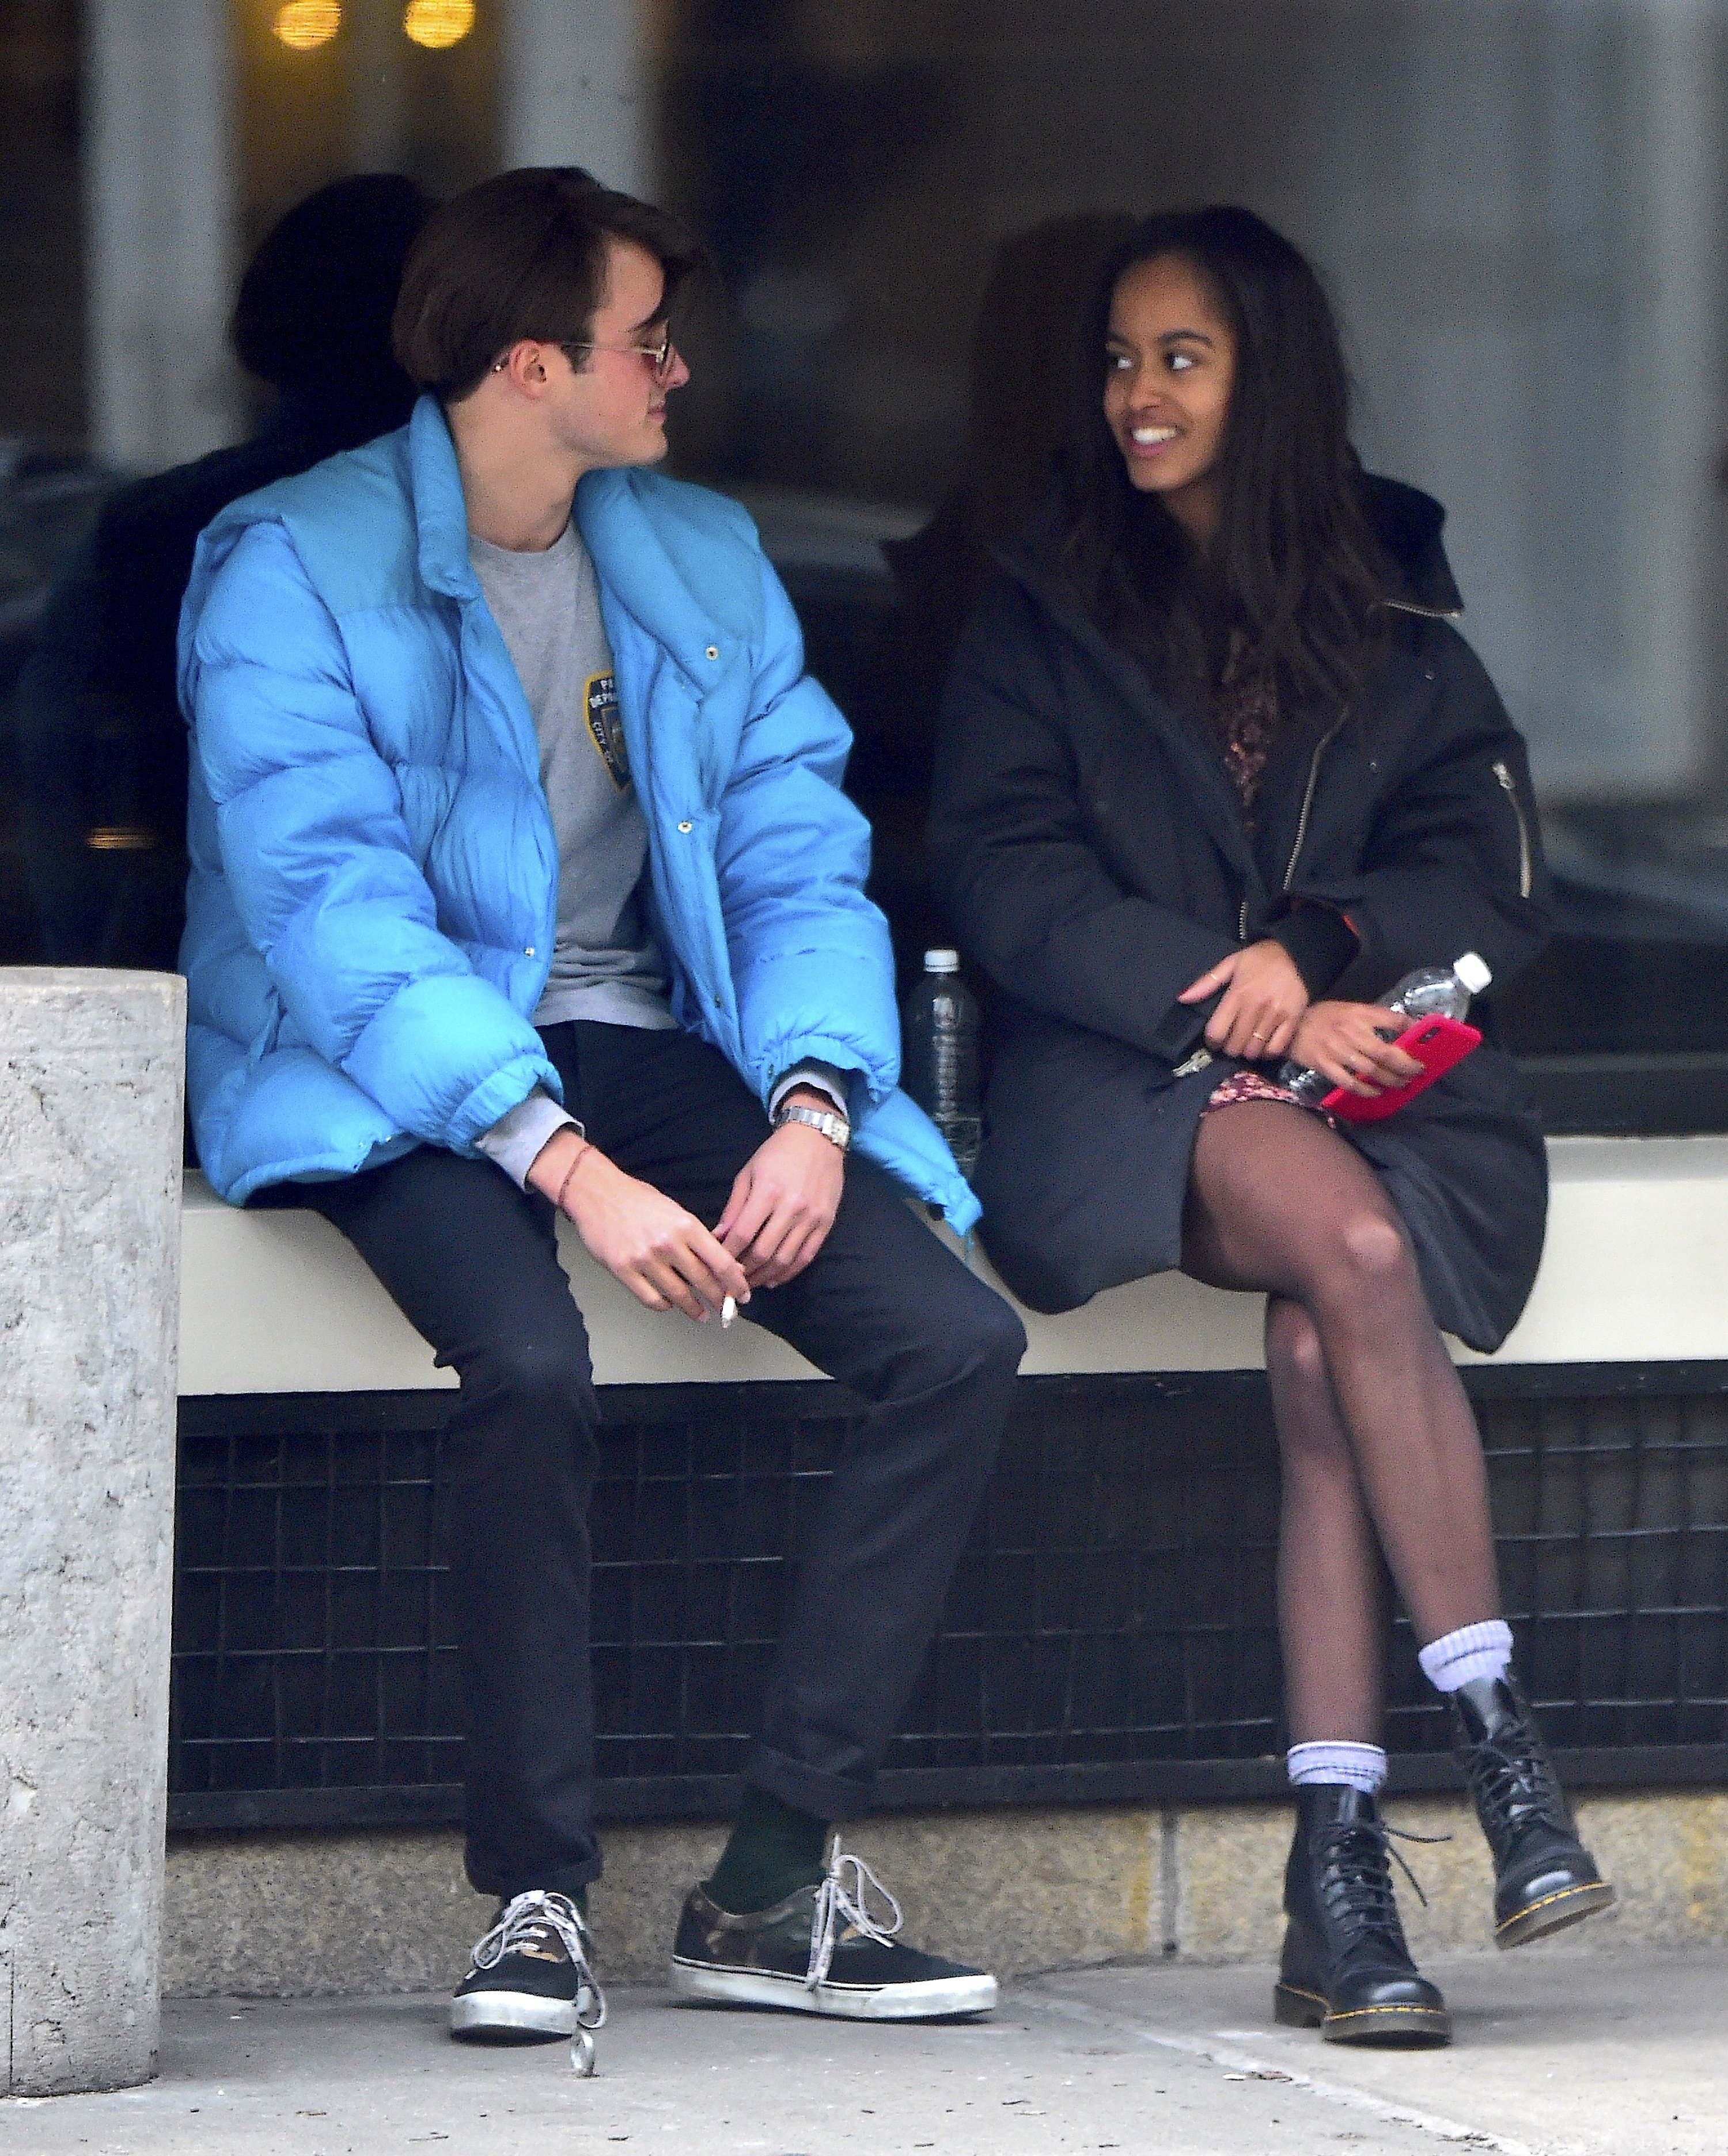 Malia Obama's boyfriend, Rory Farquharson, is seen with her on January 20, 2018 in New York City. | Source: Getty Images